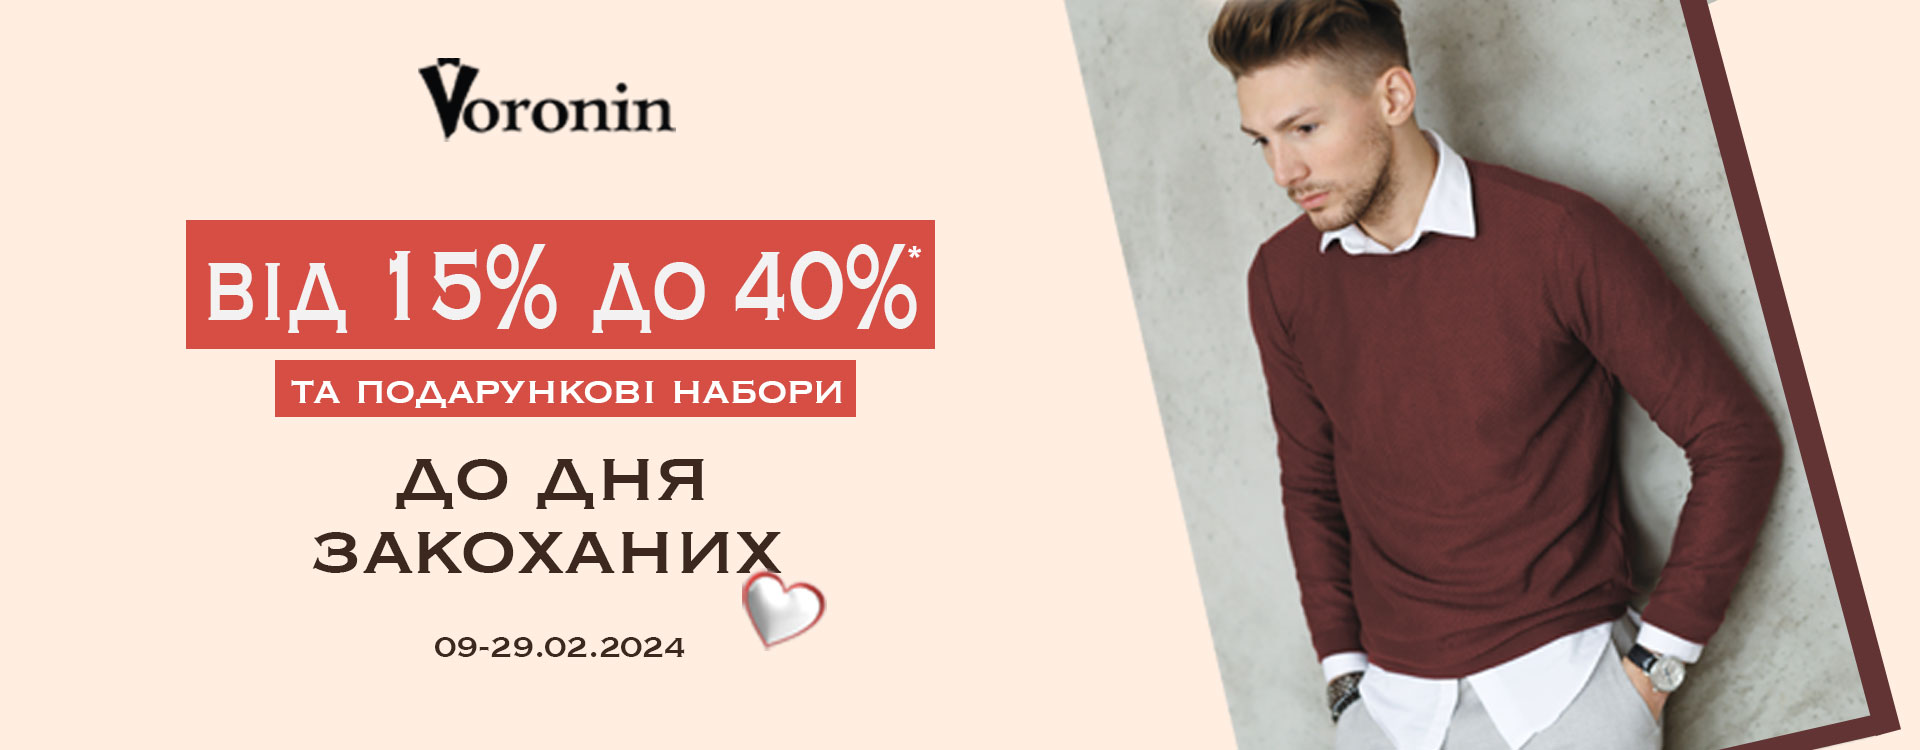 Valentine's Day in Voronin with discounts up to 40%